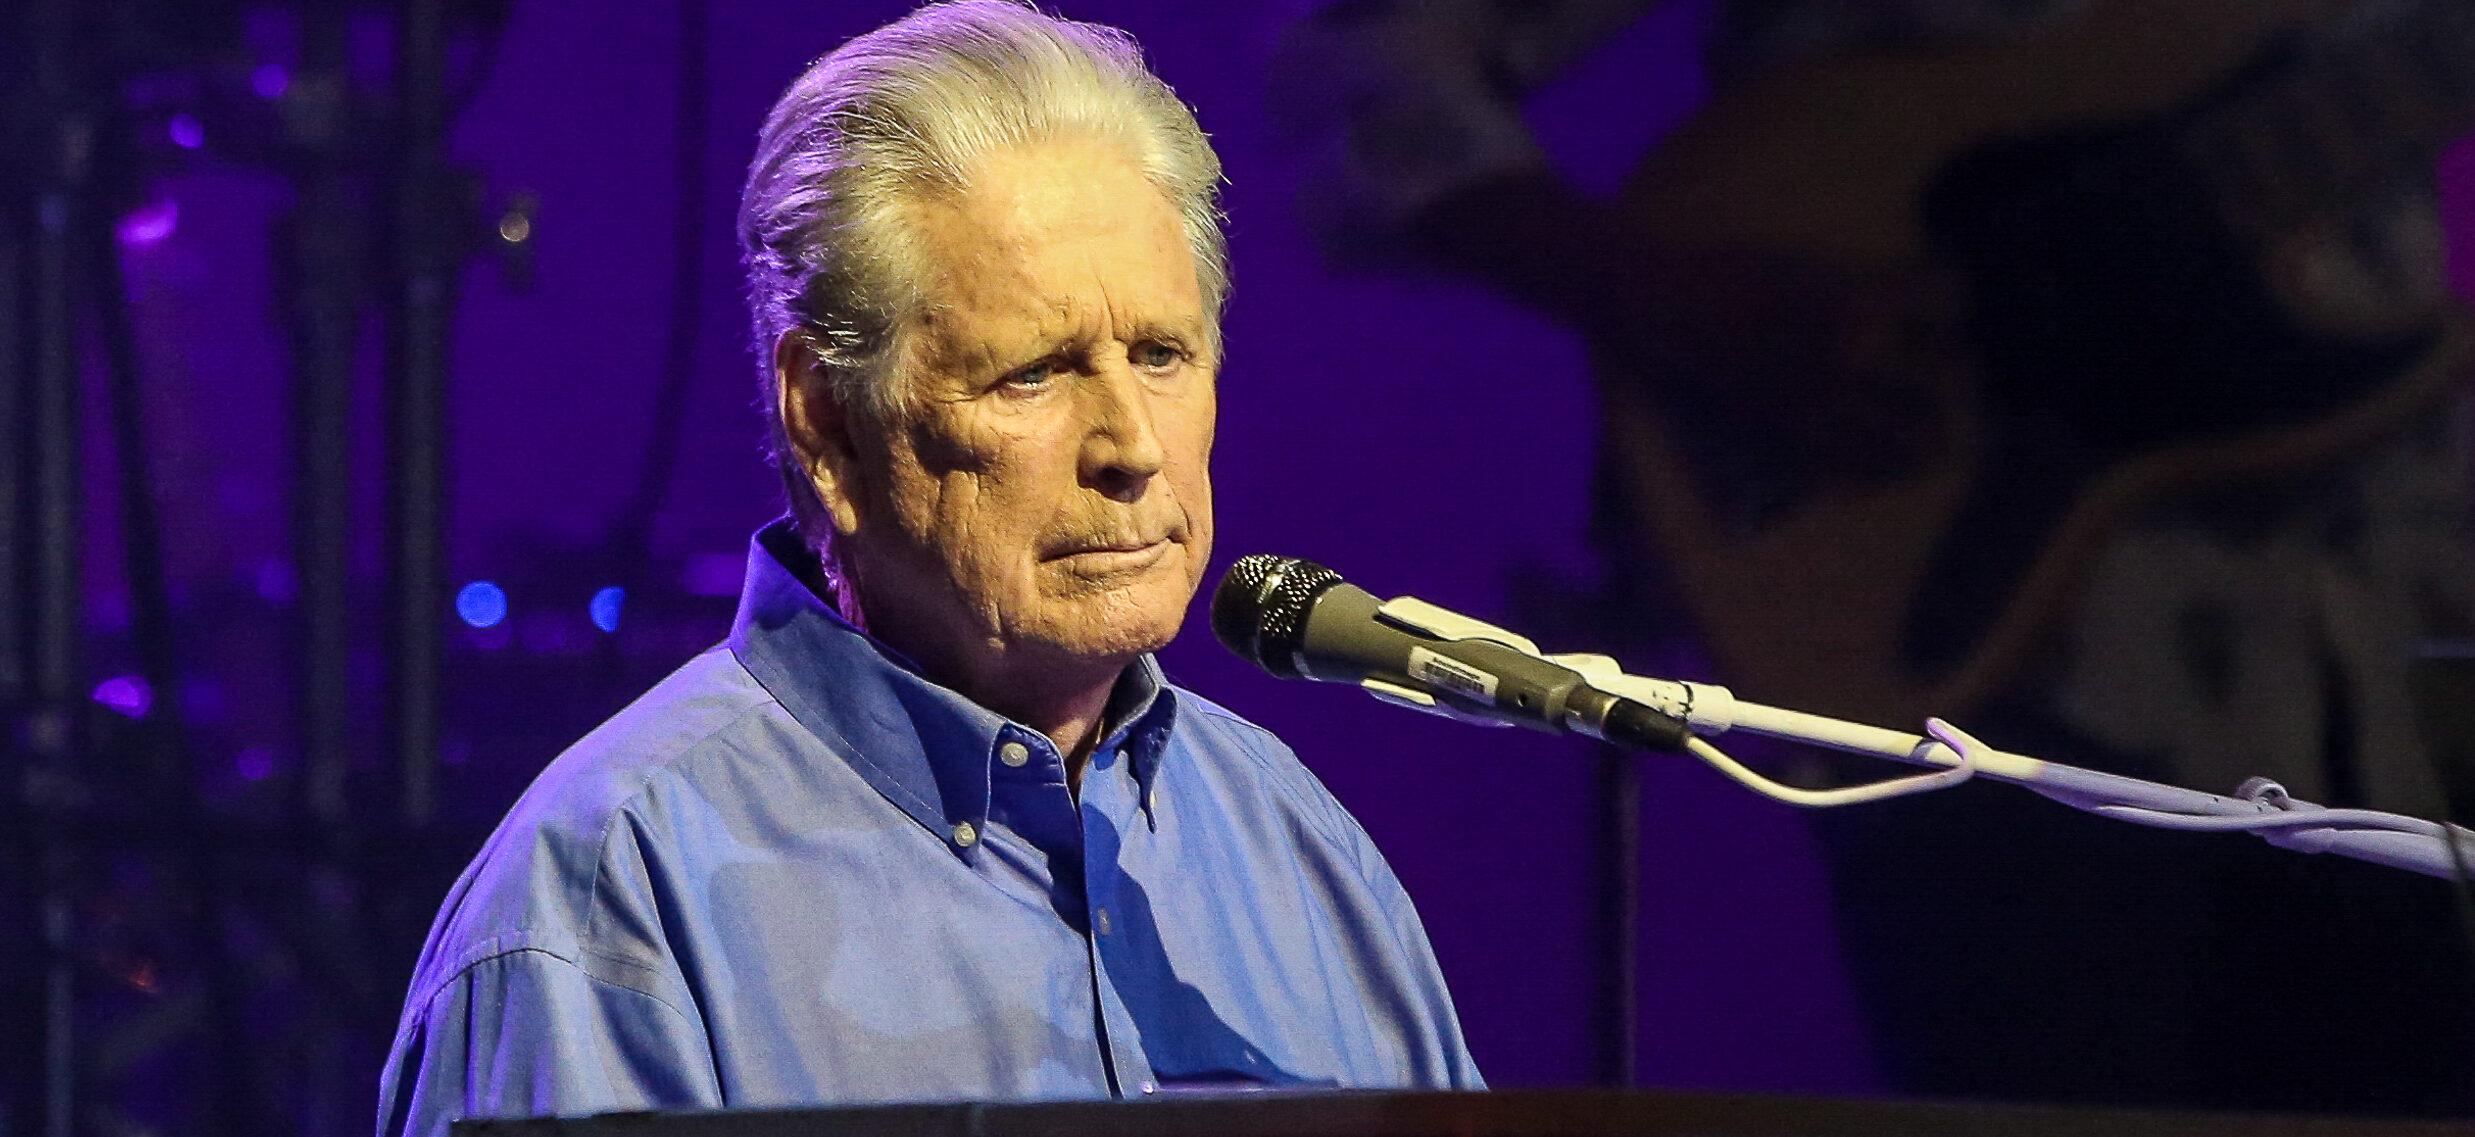 ‘Beach Boys’ Brian Wilson Suffering From Dementia, Team Files For A Conservatorship